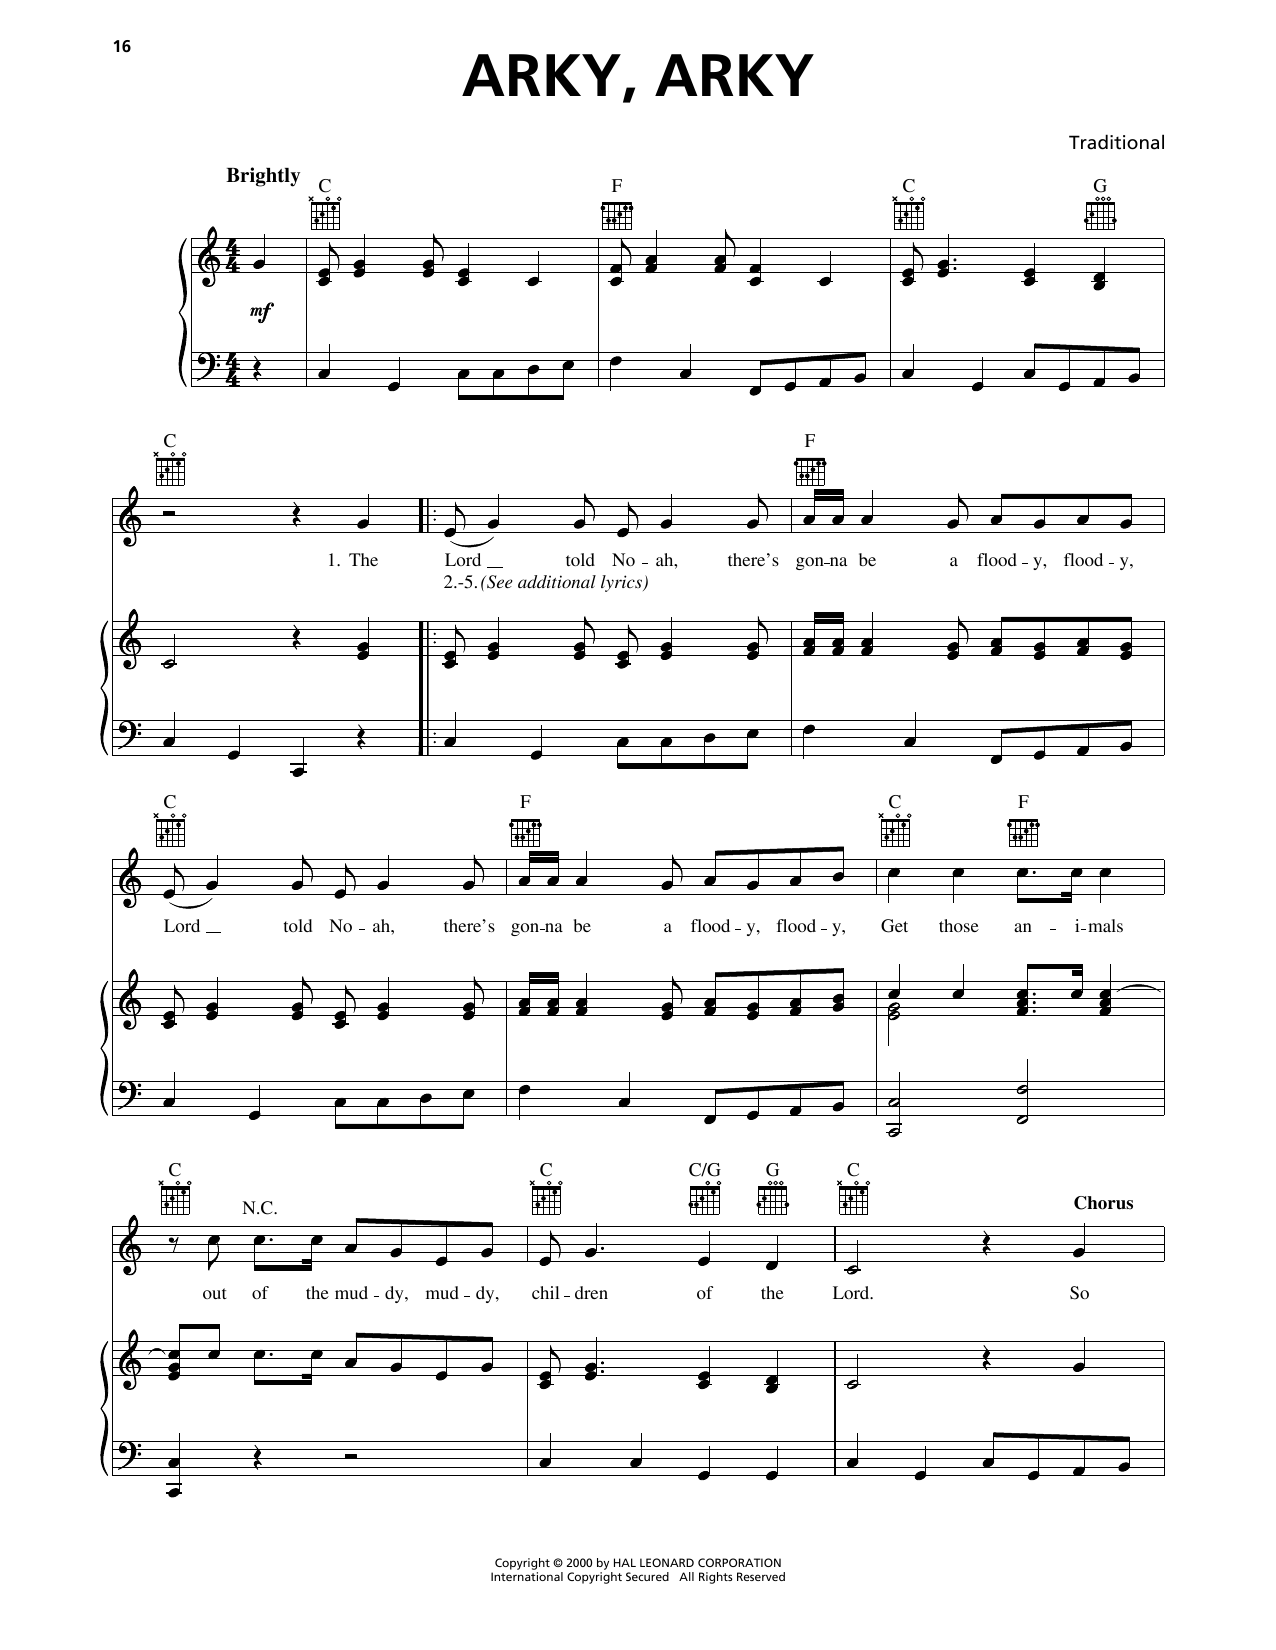 Download Traditional Arky, Arky Sheet Music